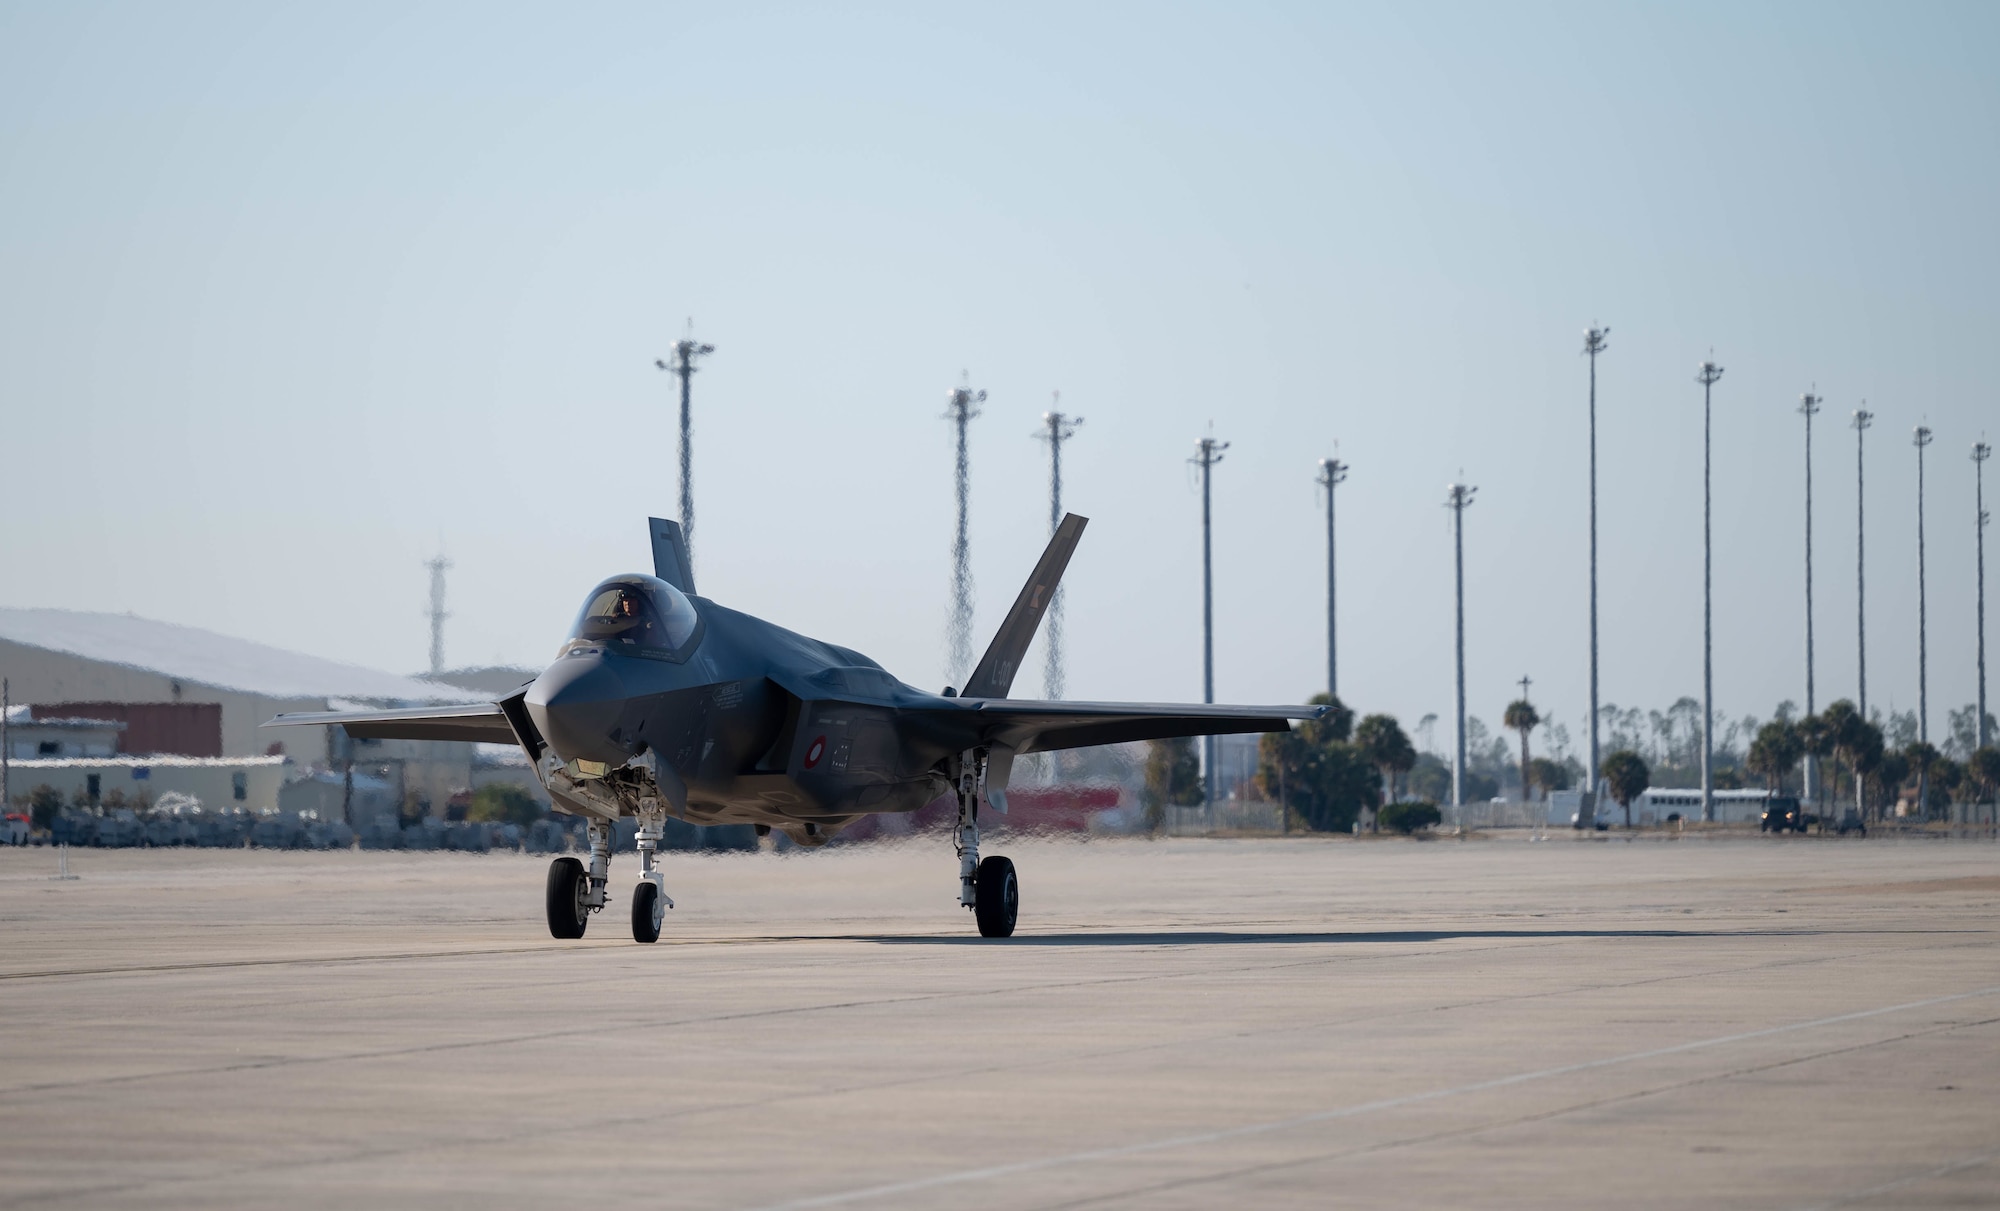 An F-35A Lightning II taxis on the flight line.